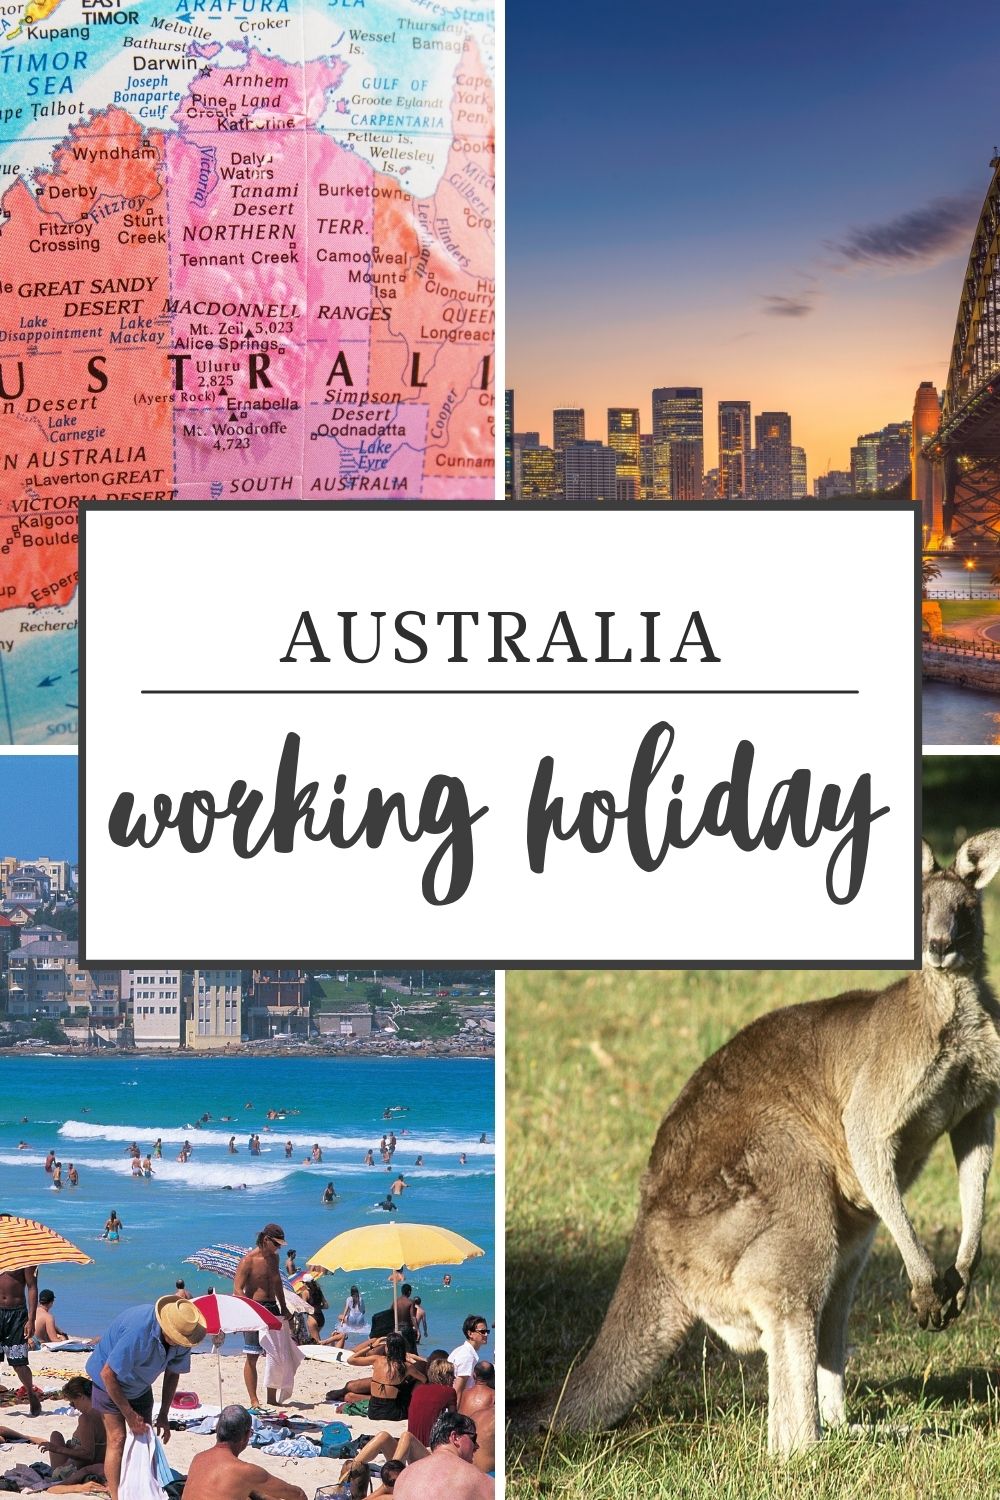 Australia is a Popular Working Holiday Visa Destination. You Will Visit Vibrant Cities Like Sydney, Swim At Inviting Beaches And See Native Wildlife Like Kangaroos.